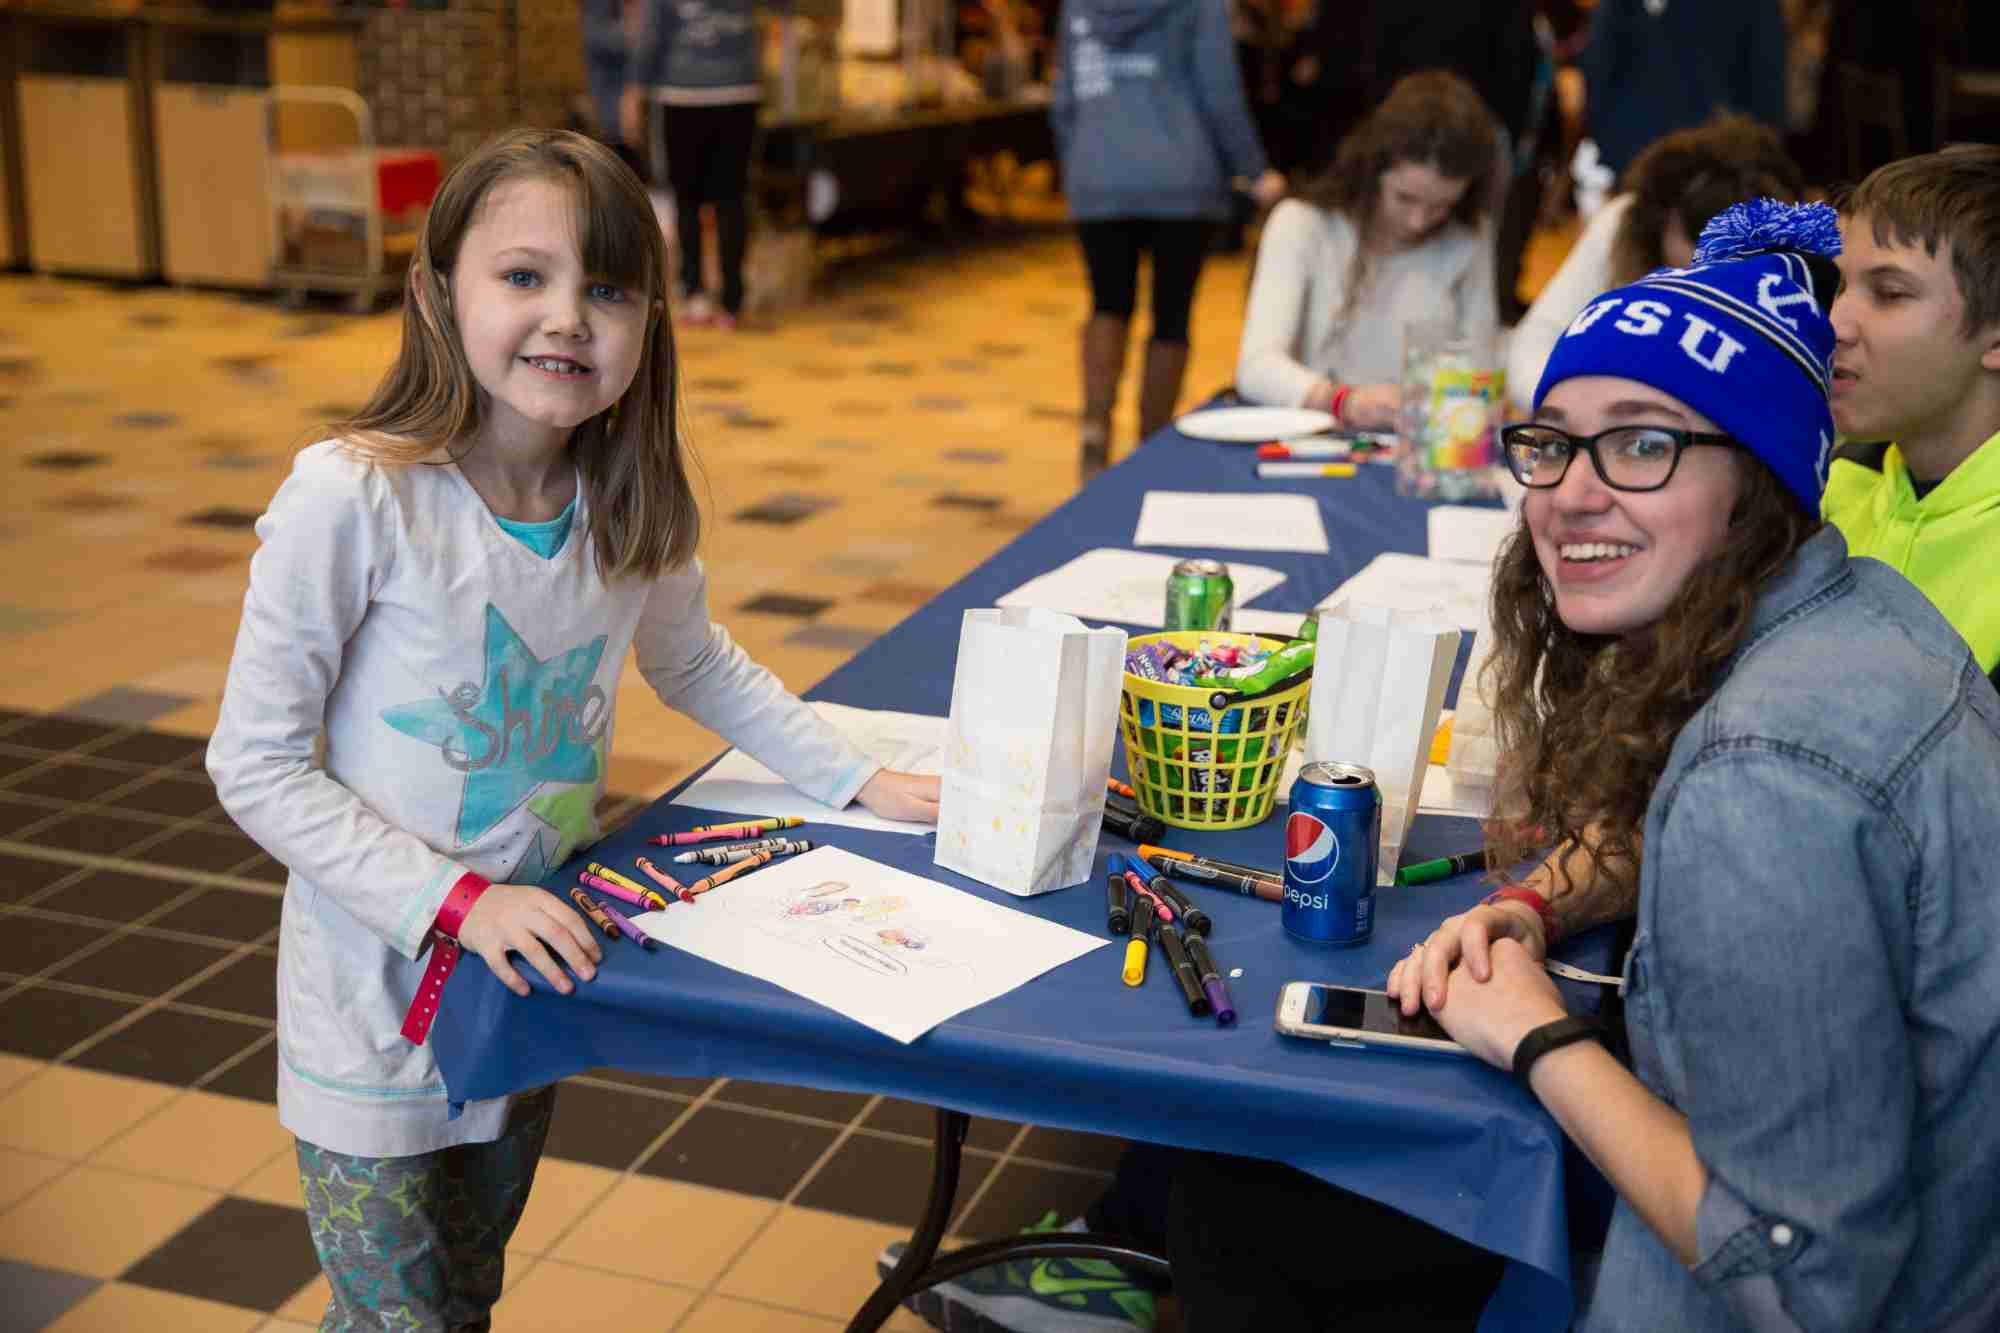 A GV student and a kid smile at the camera while coloring at a table